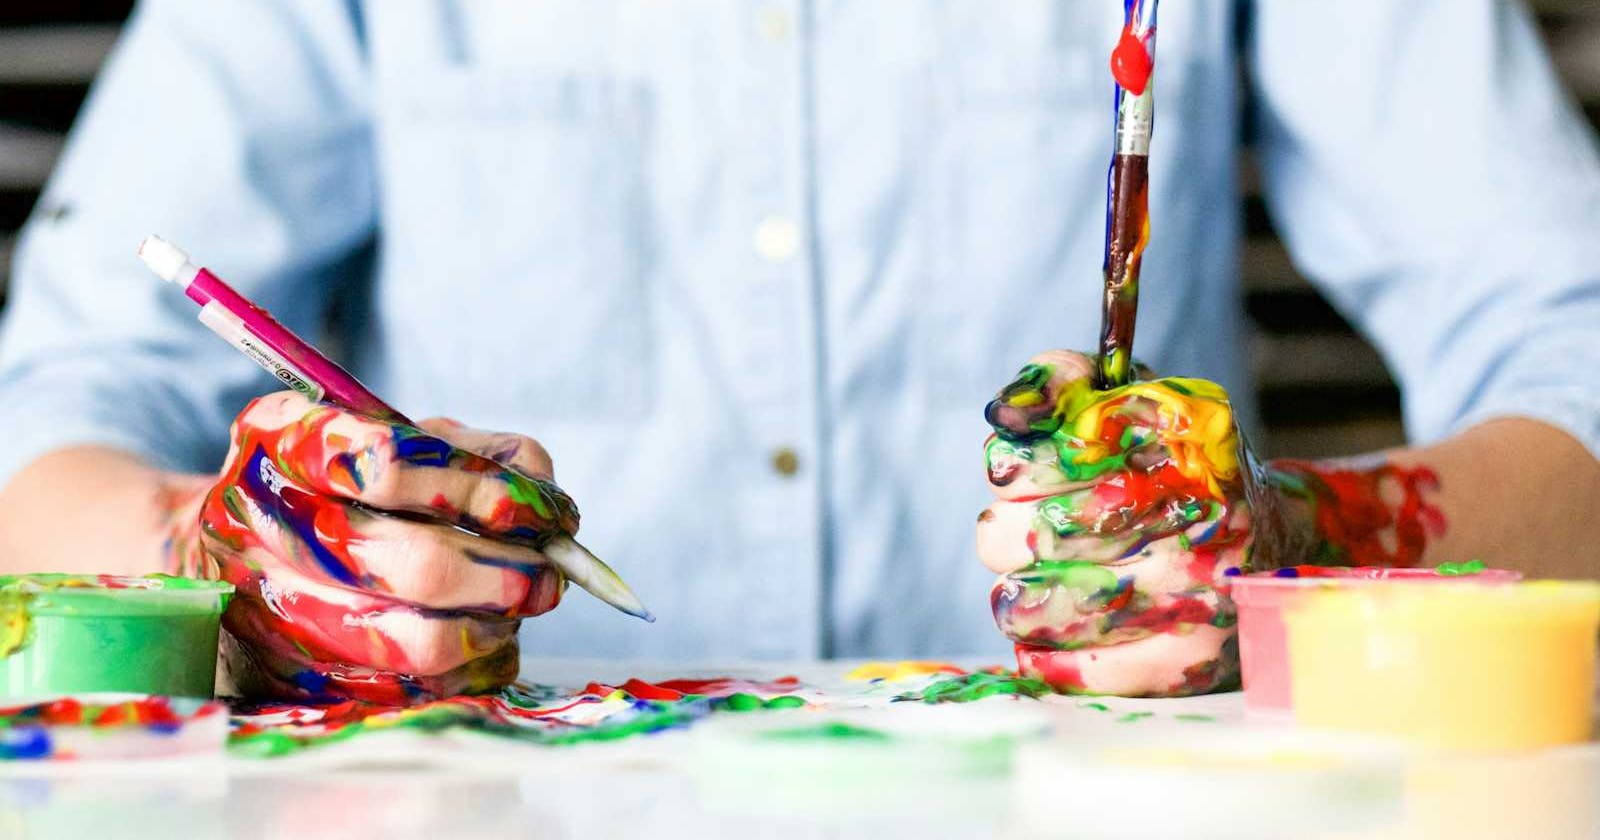 The benefits and challenges of applying creativity in business